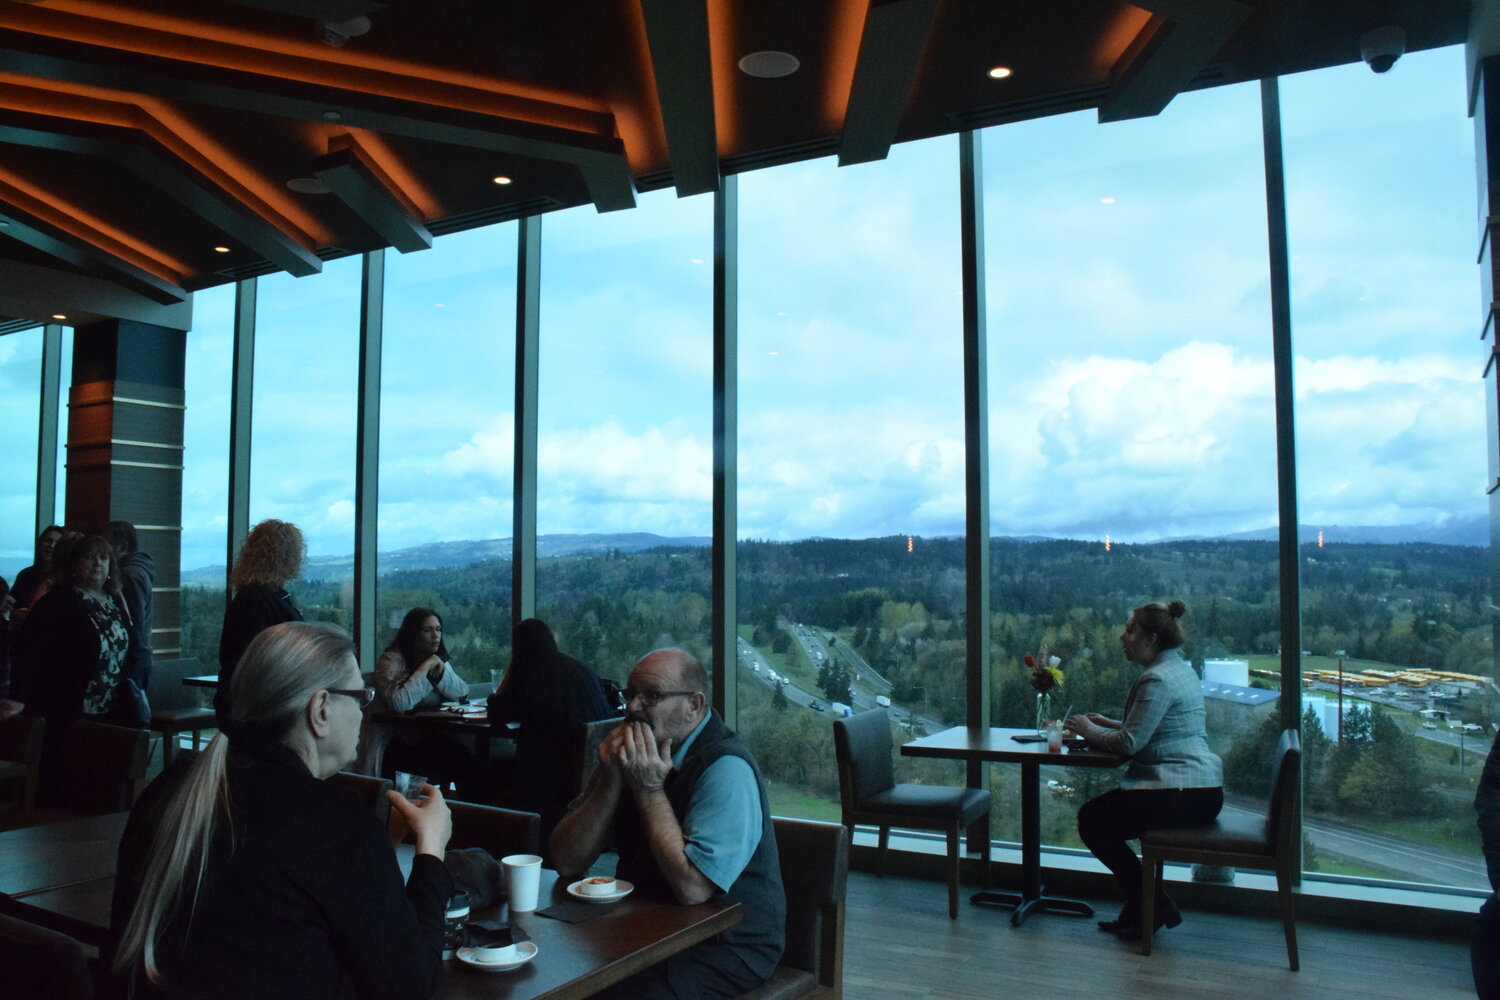 The first patrons of the top-floor restaurant at ilani’s new hotel sit with a scenic view of Clark County following the grand opening of the building April 24.